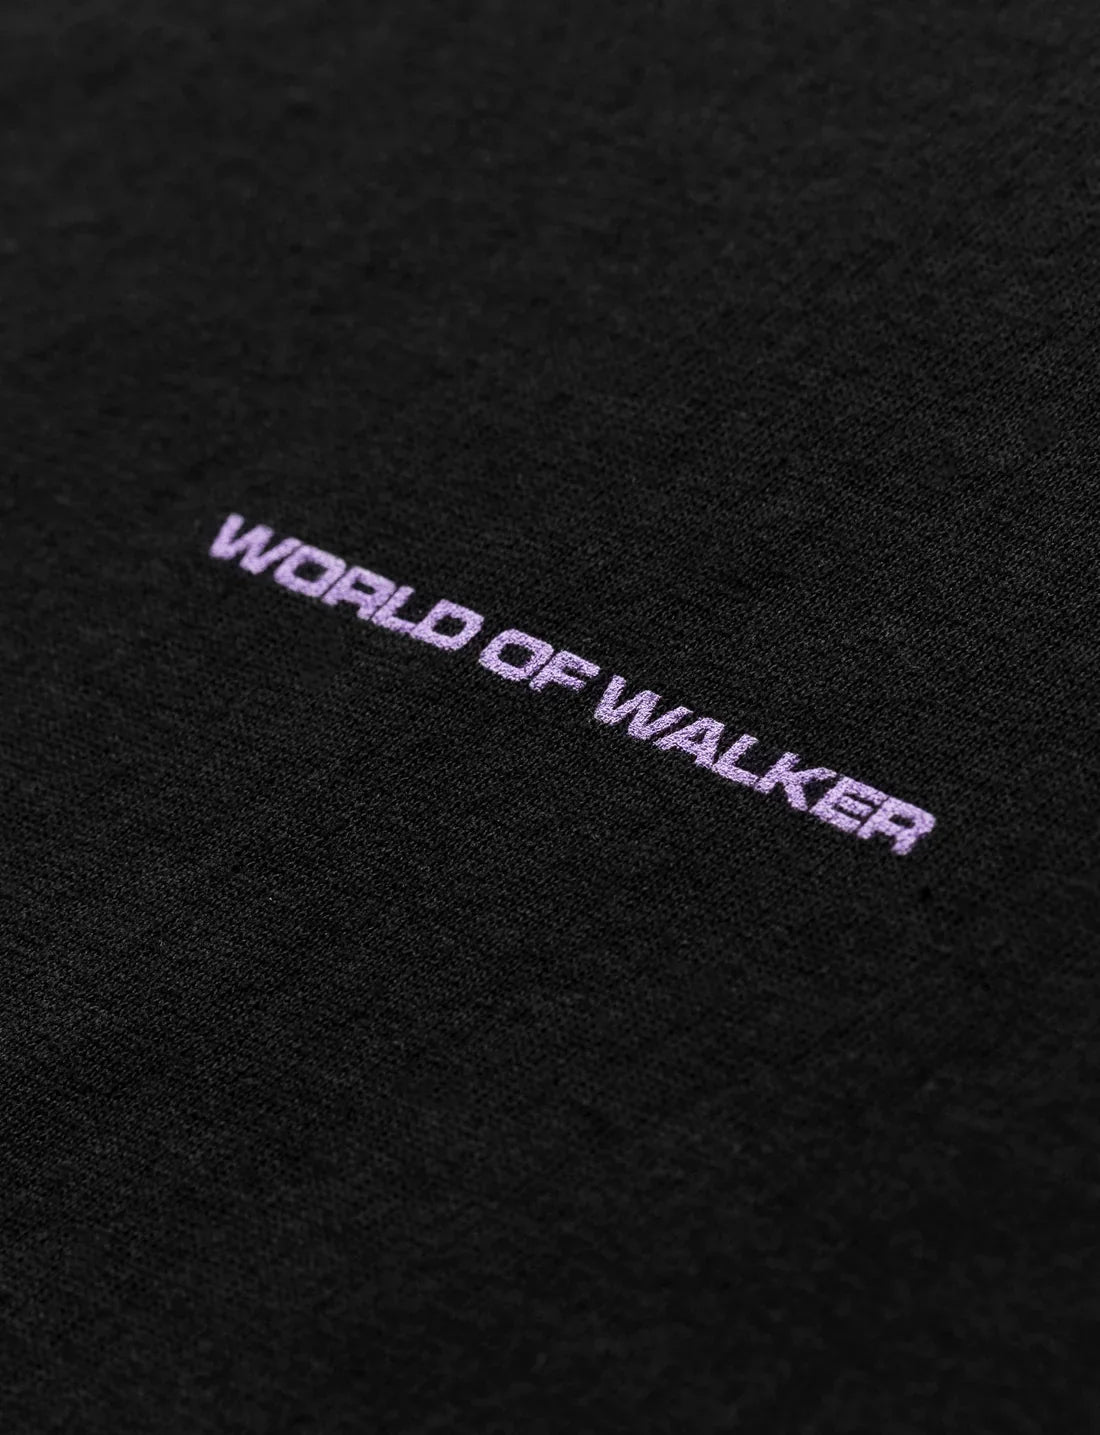 Detail shot showcasing the 'World of Walker' inscription in purple, part of the unique back design of the Melting Rose Hoodie.